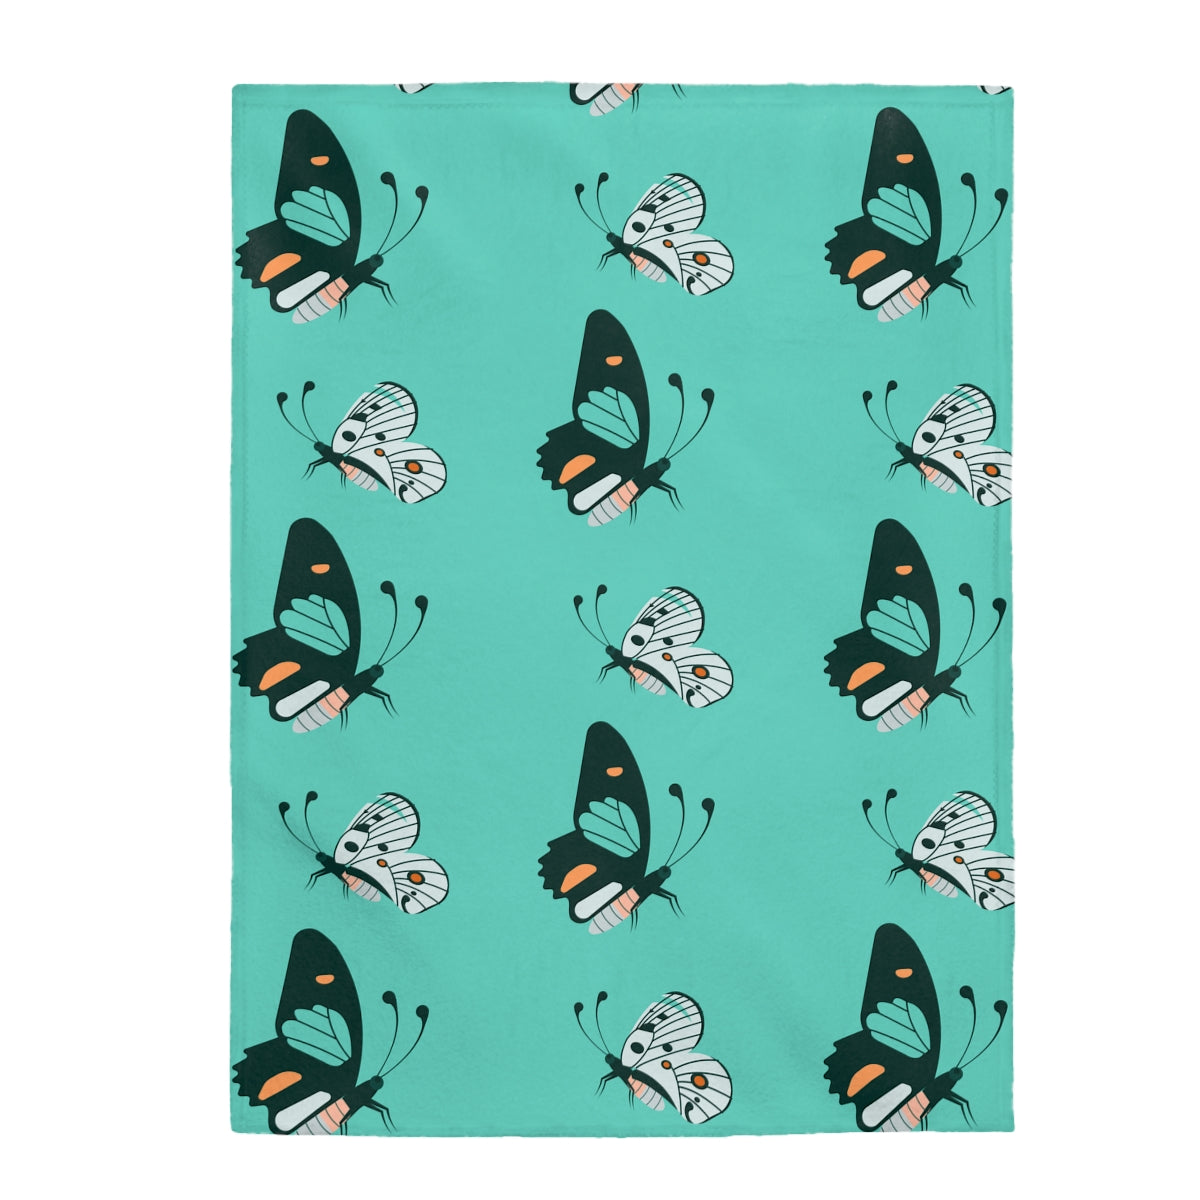 Plush Blanket for Kids Personalised, Butterfly, Newborn Blanket, Super Soft Cozy Throw Blankt for Teens, Adults